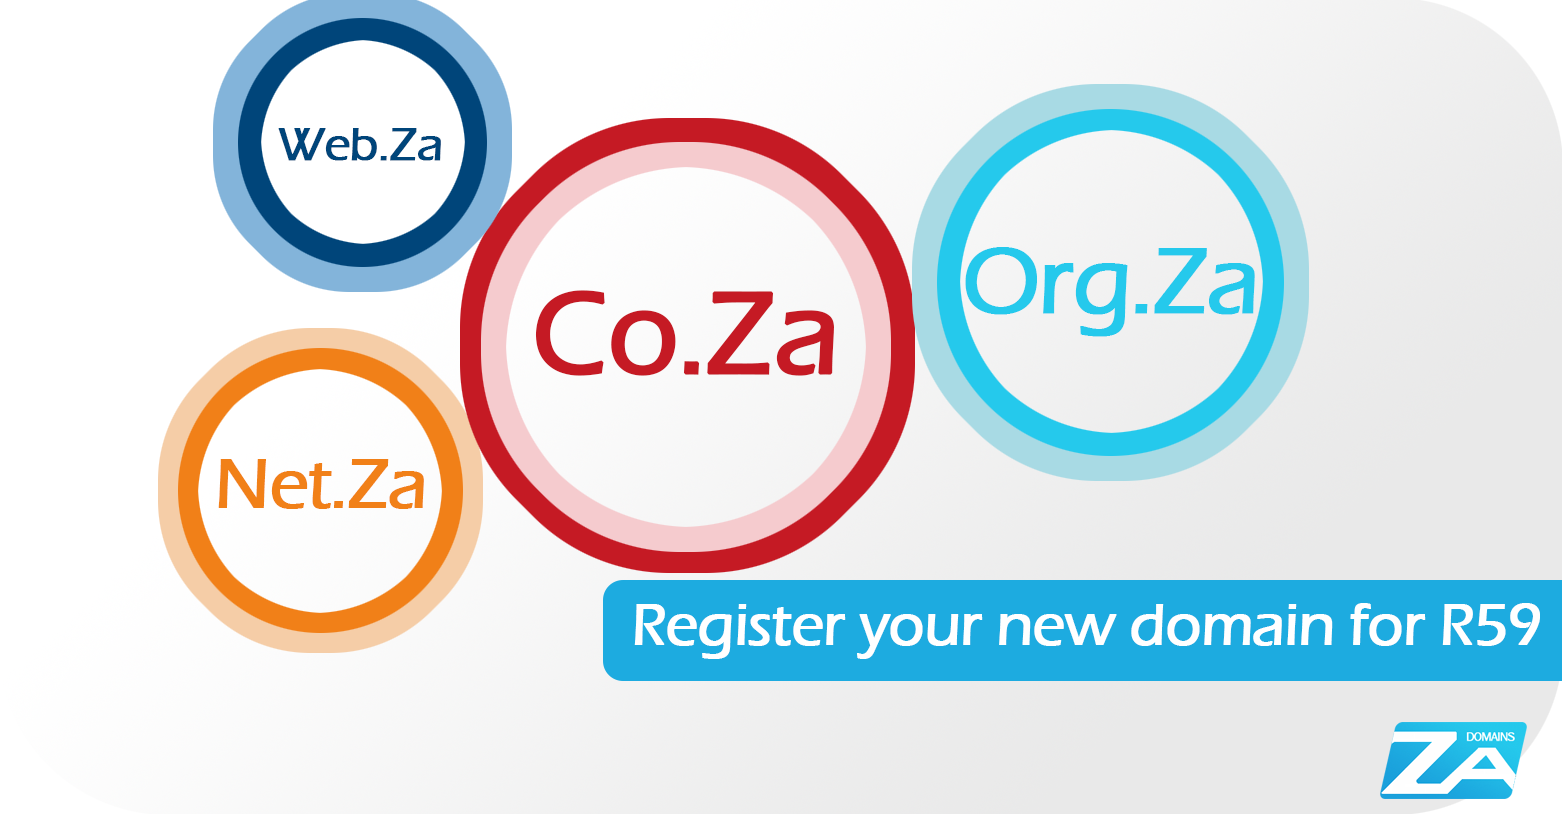 Register your new domain for R59